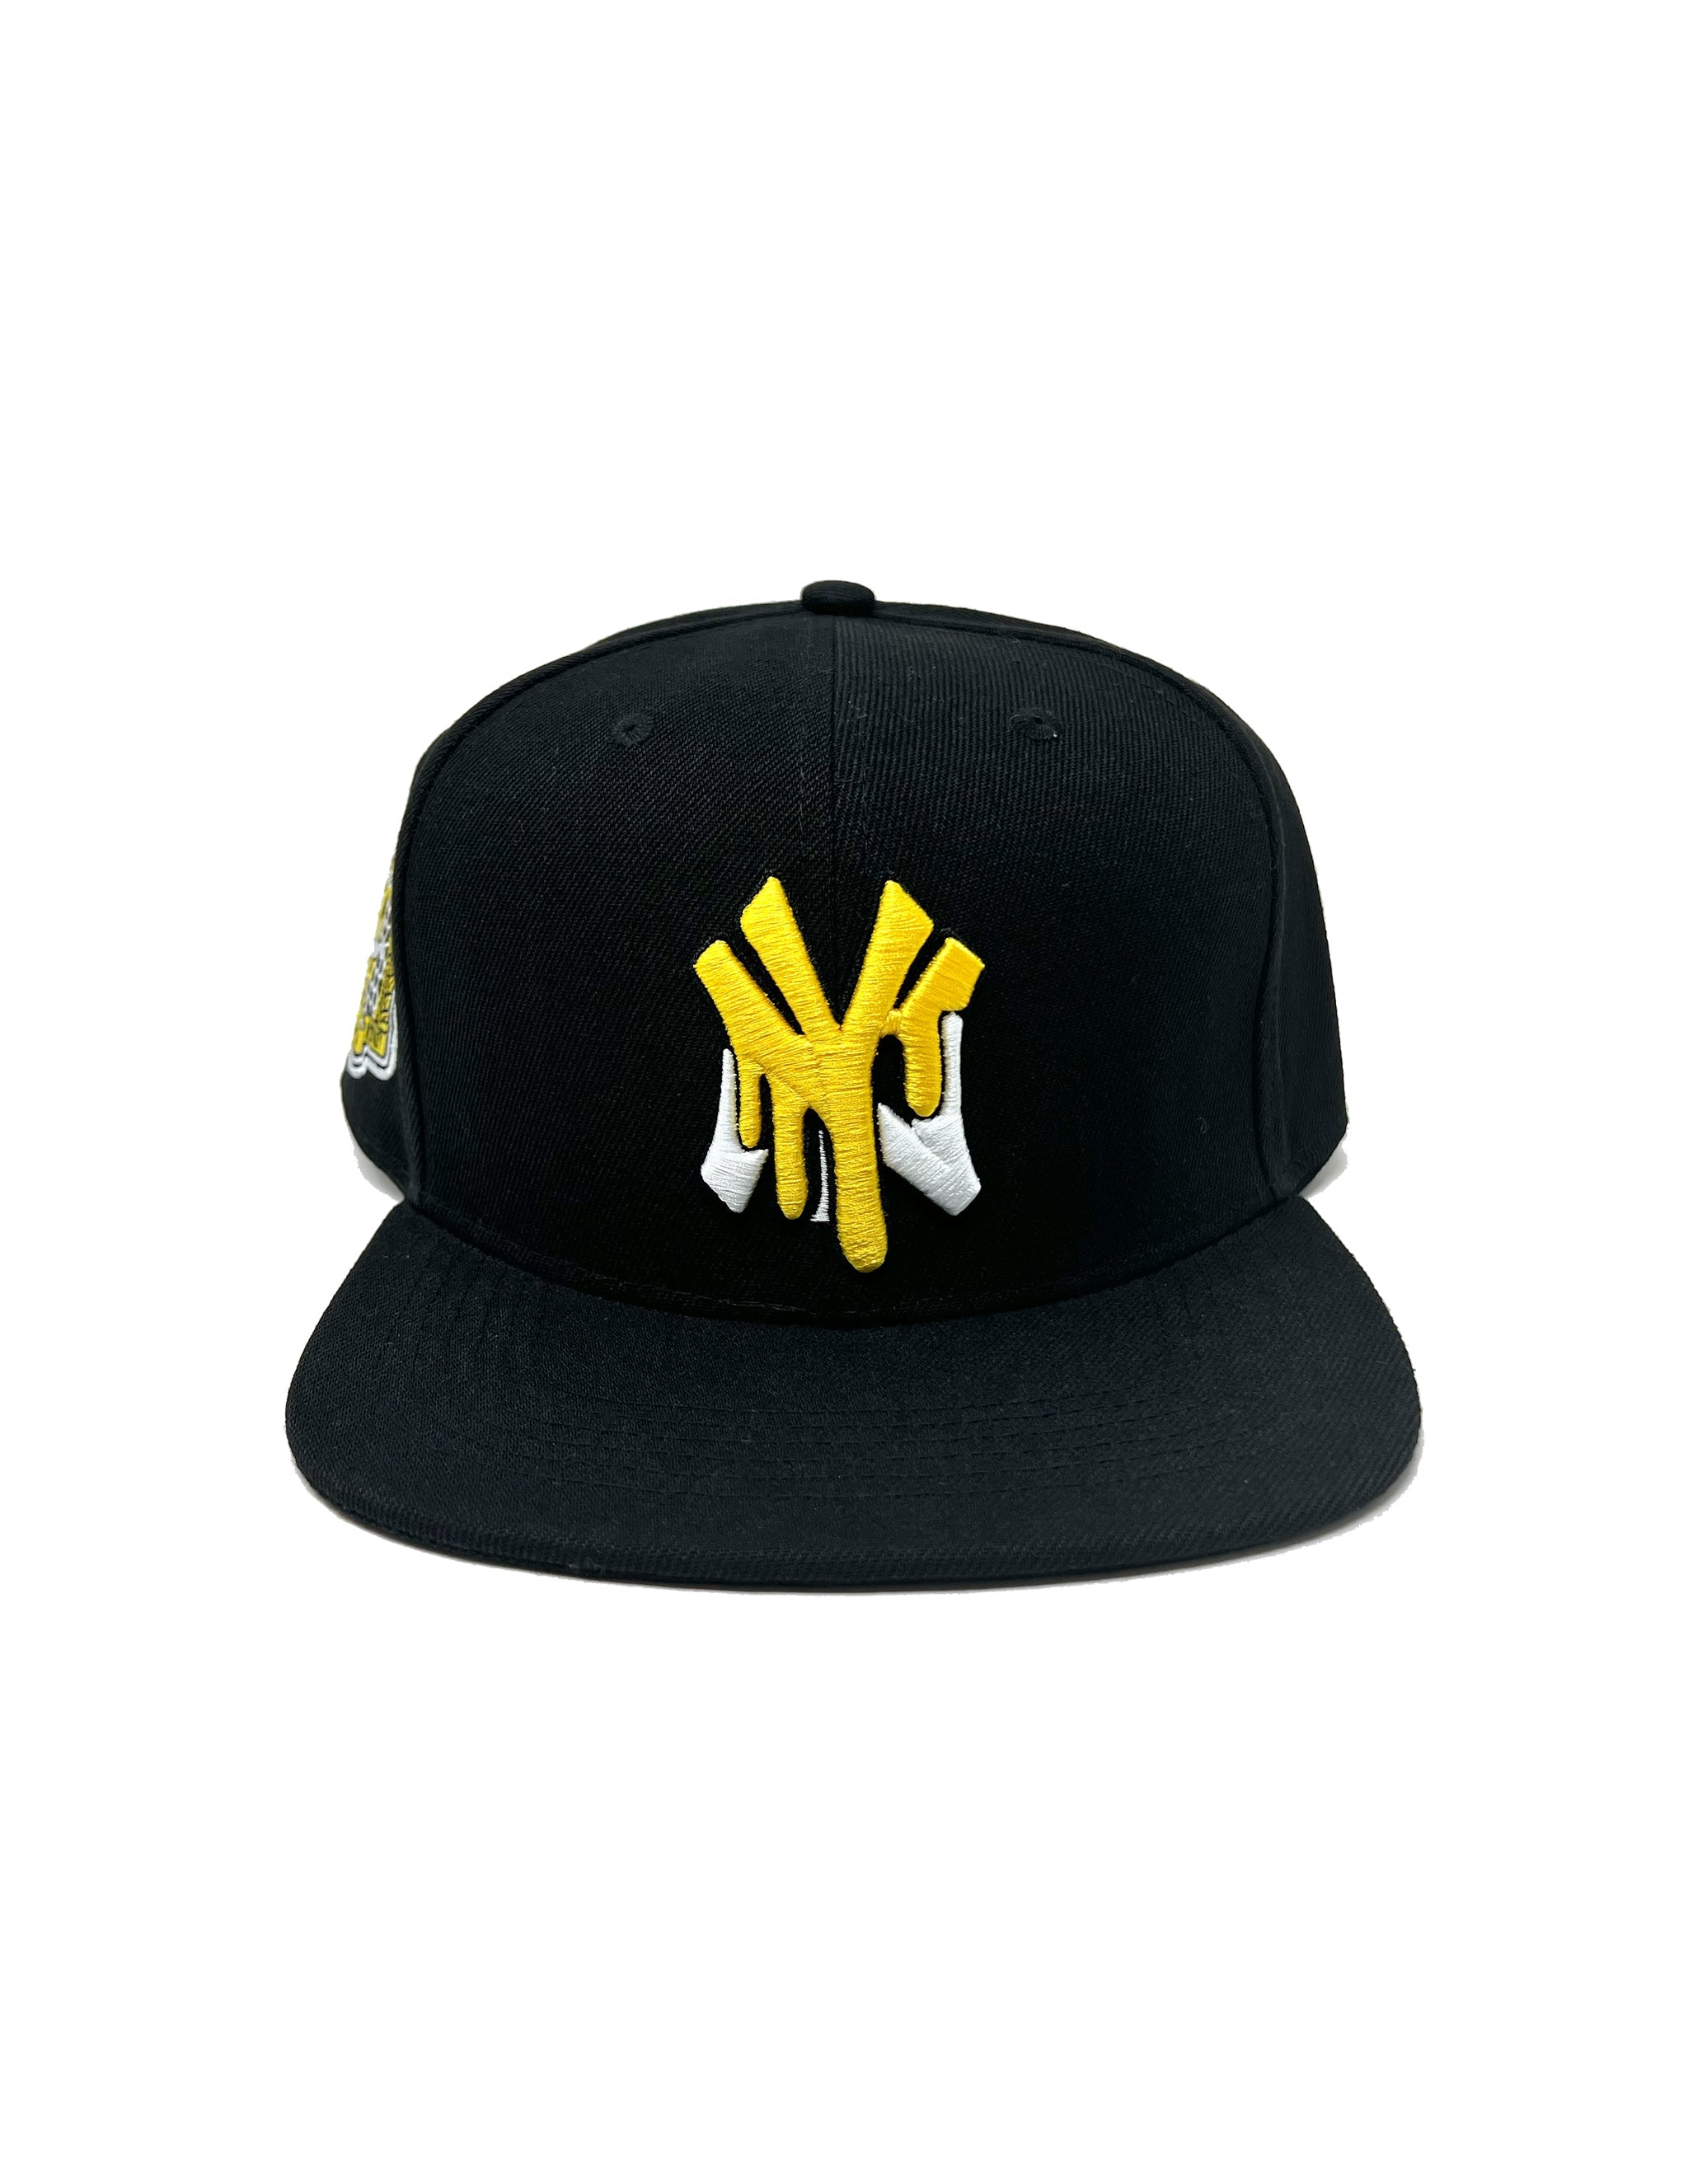 NYC Drip Fitted Hat